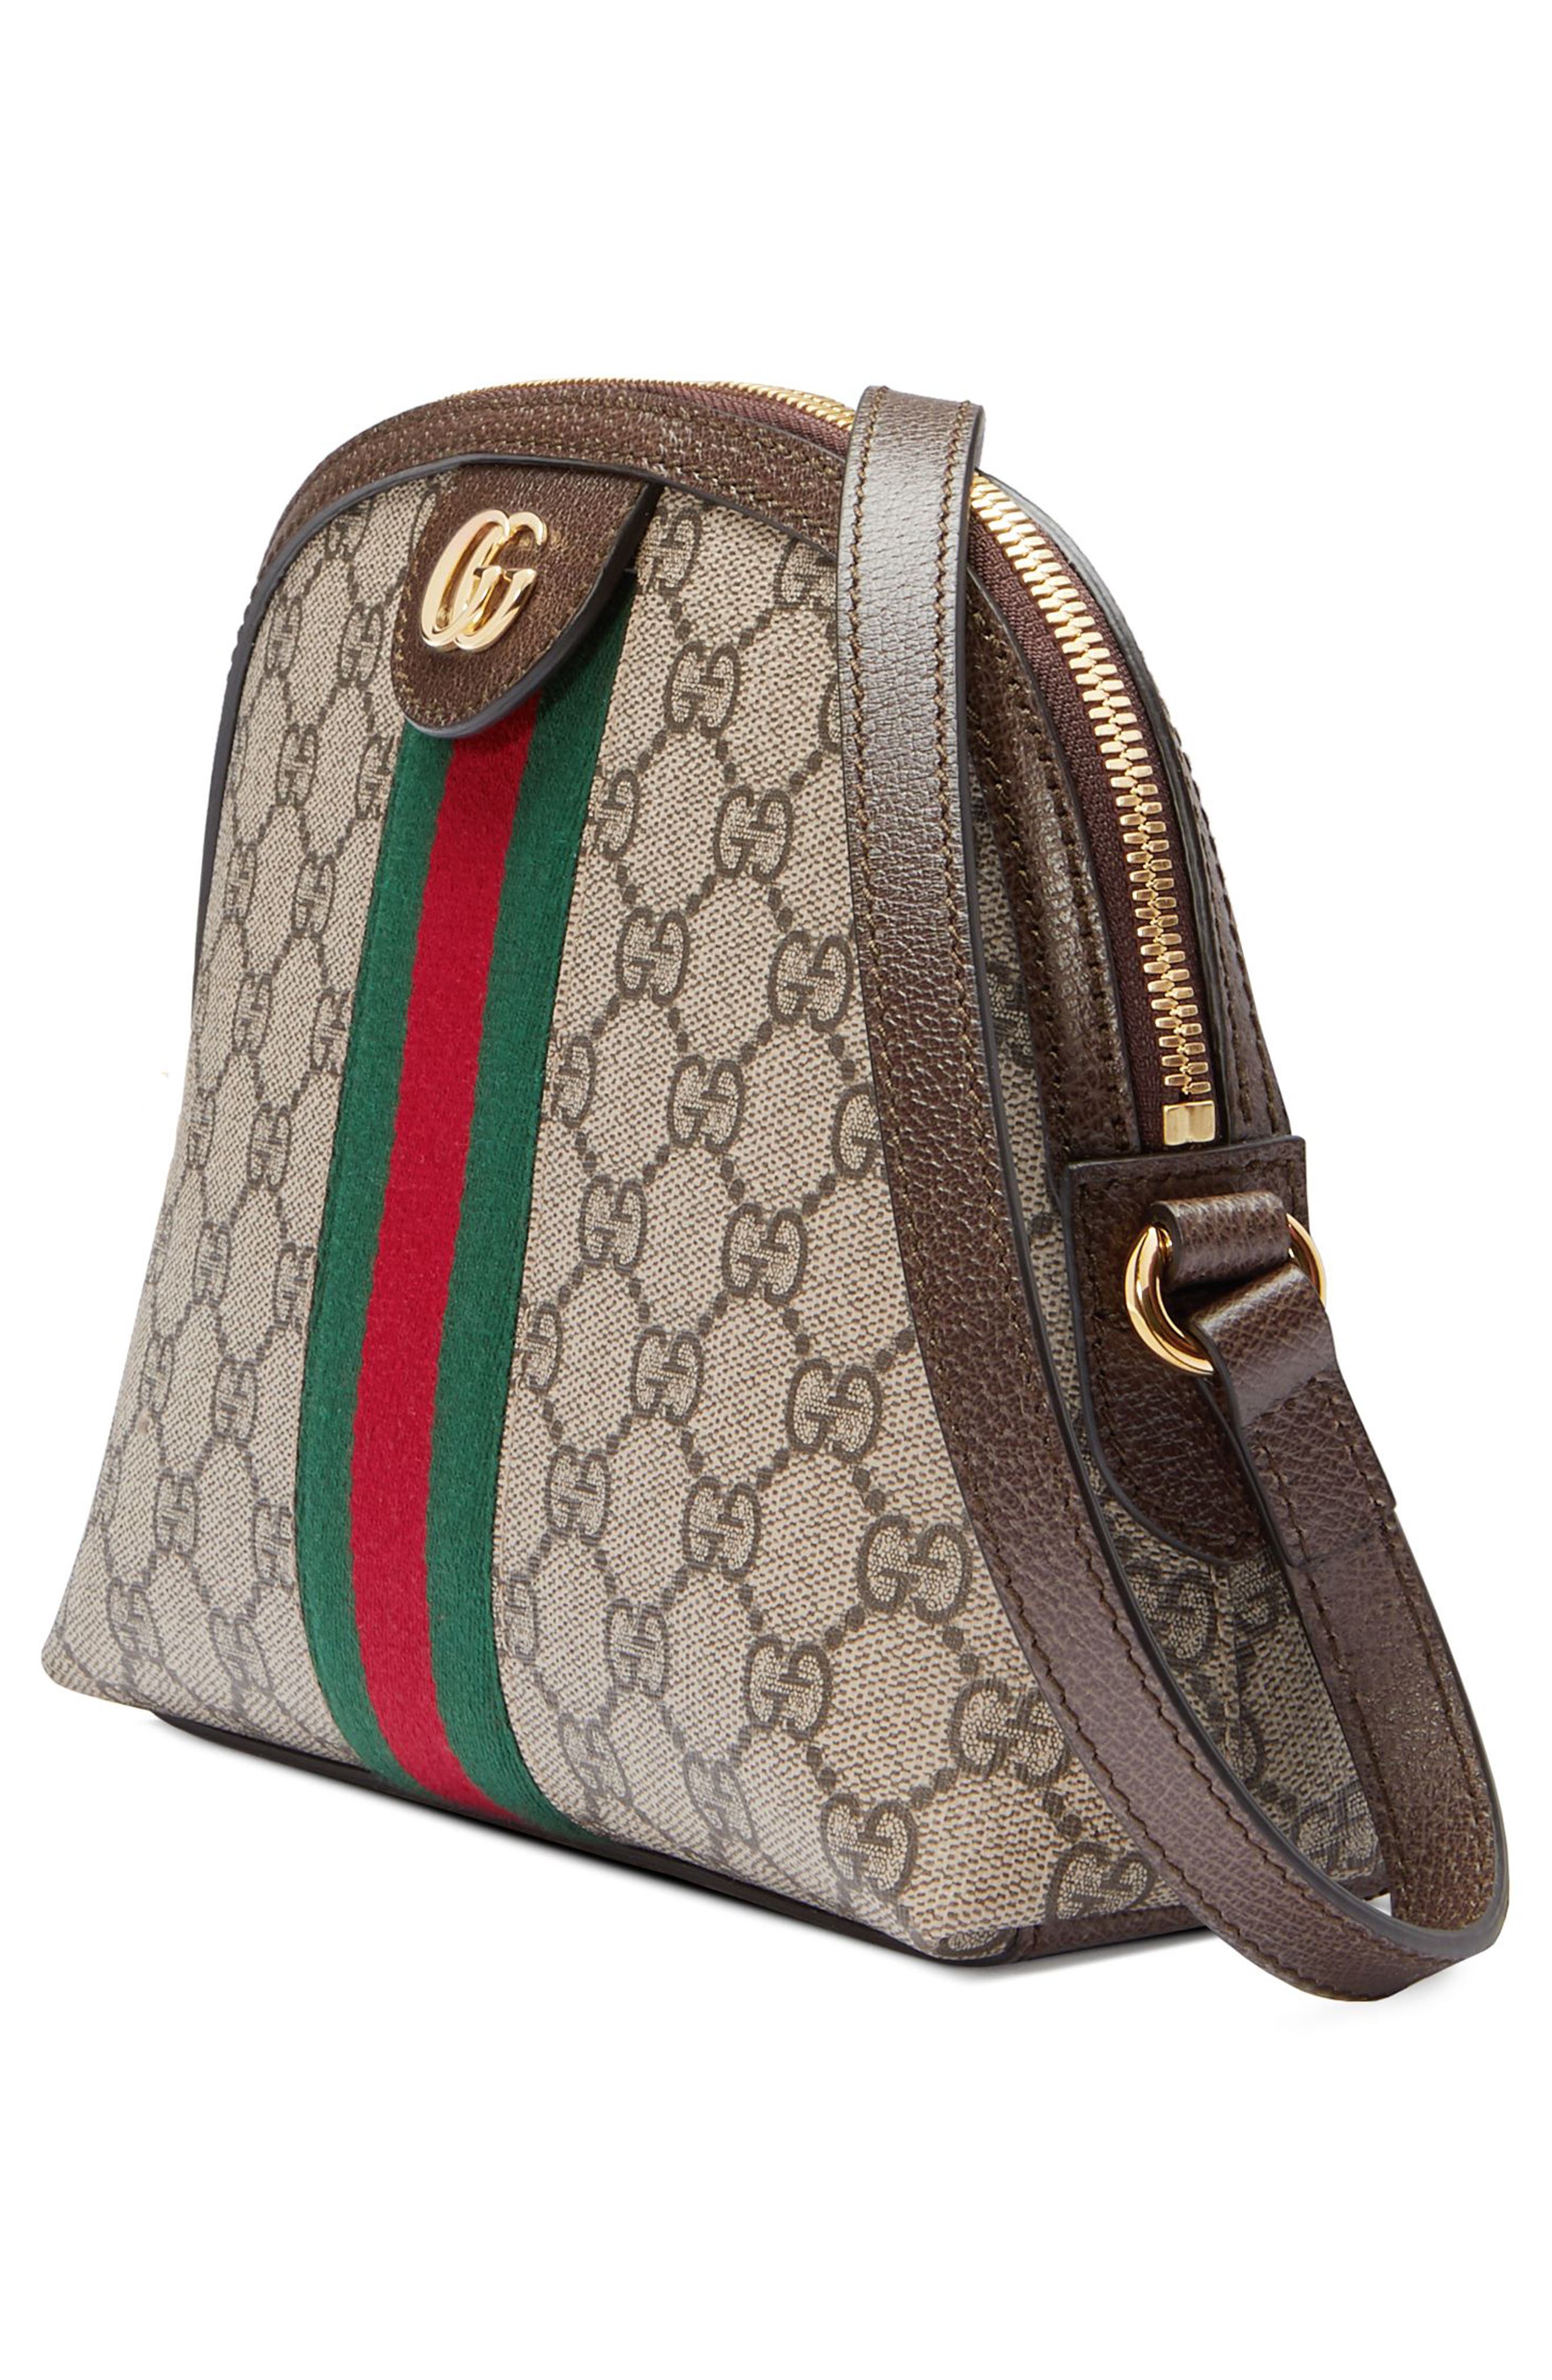 GUCCI OPHIDIA LEATHER-TRIMMED PRINTED COATED-CANVAS SHOULDER BAG, BROWN | ModeSens